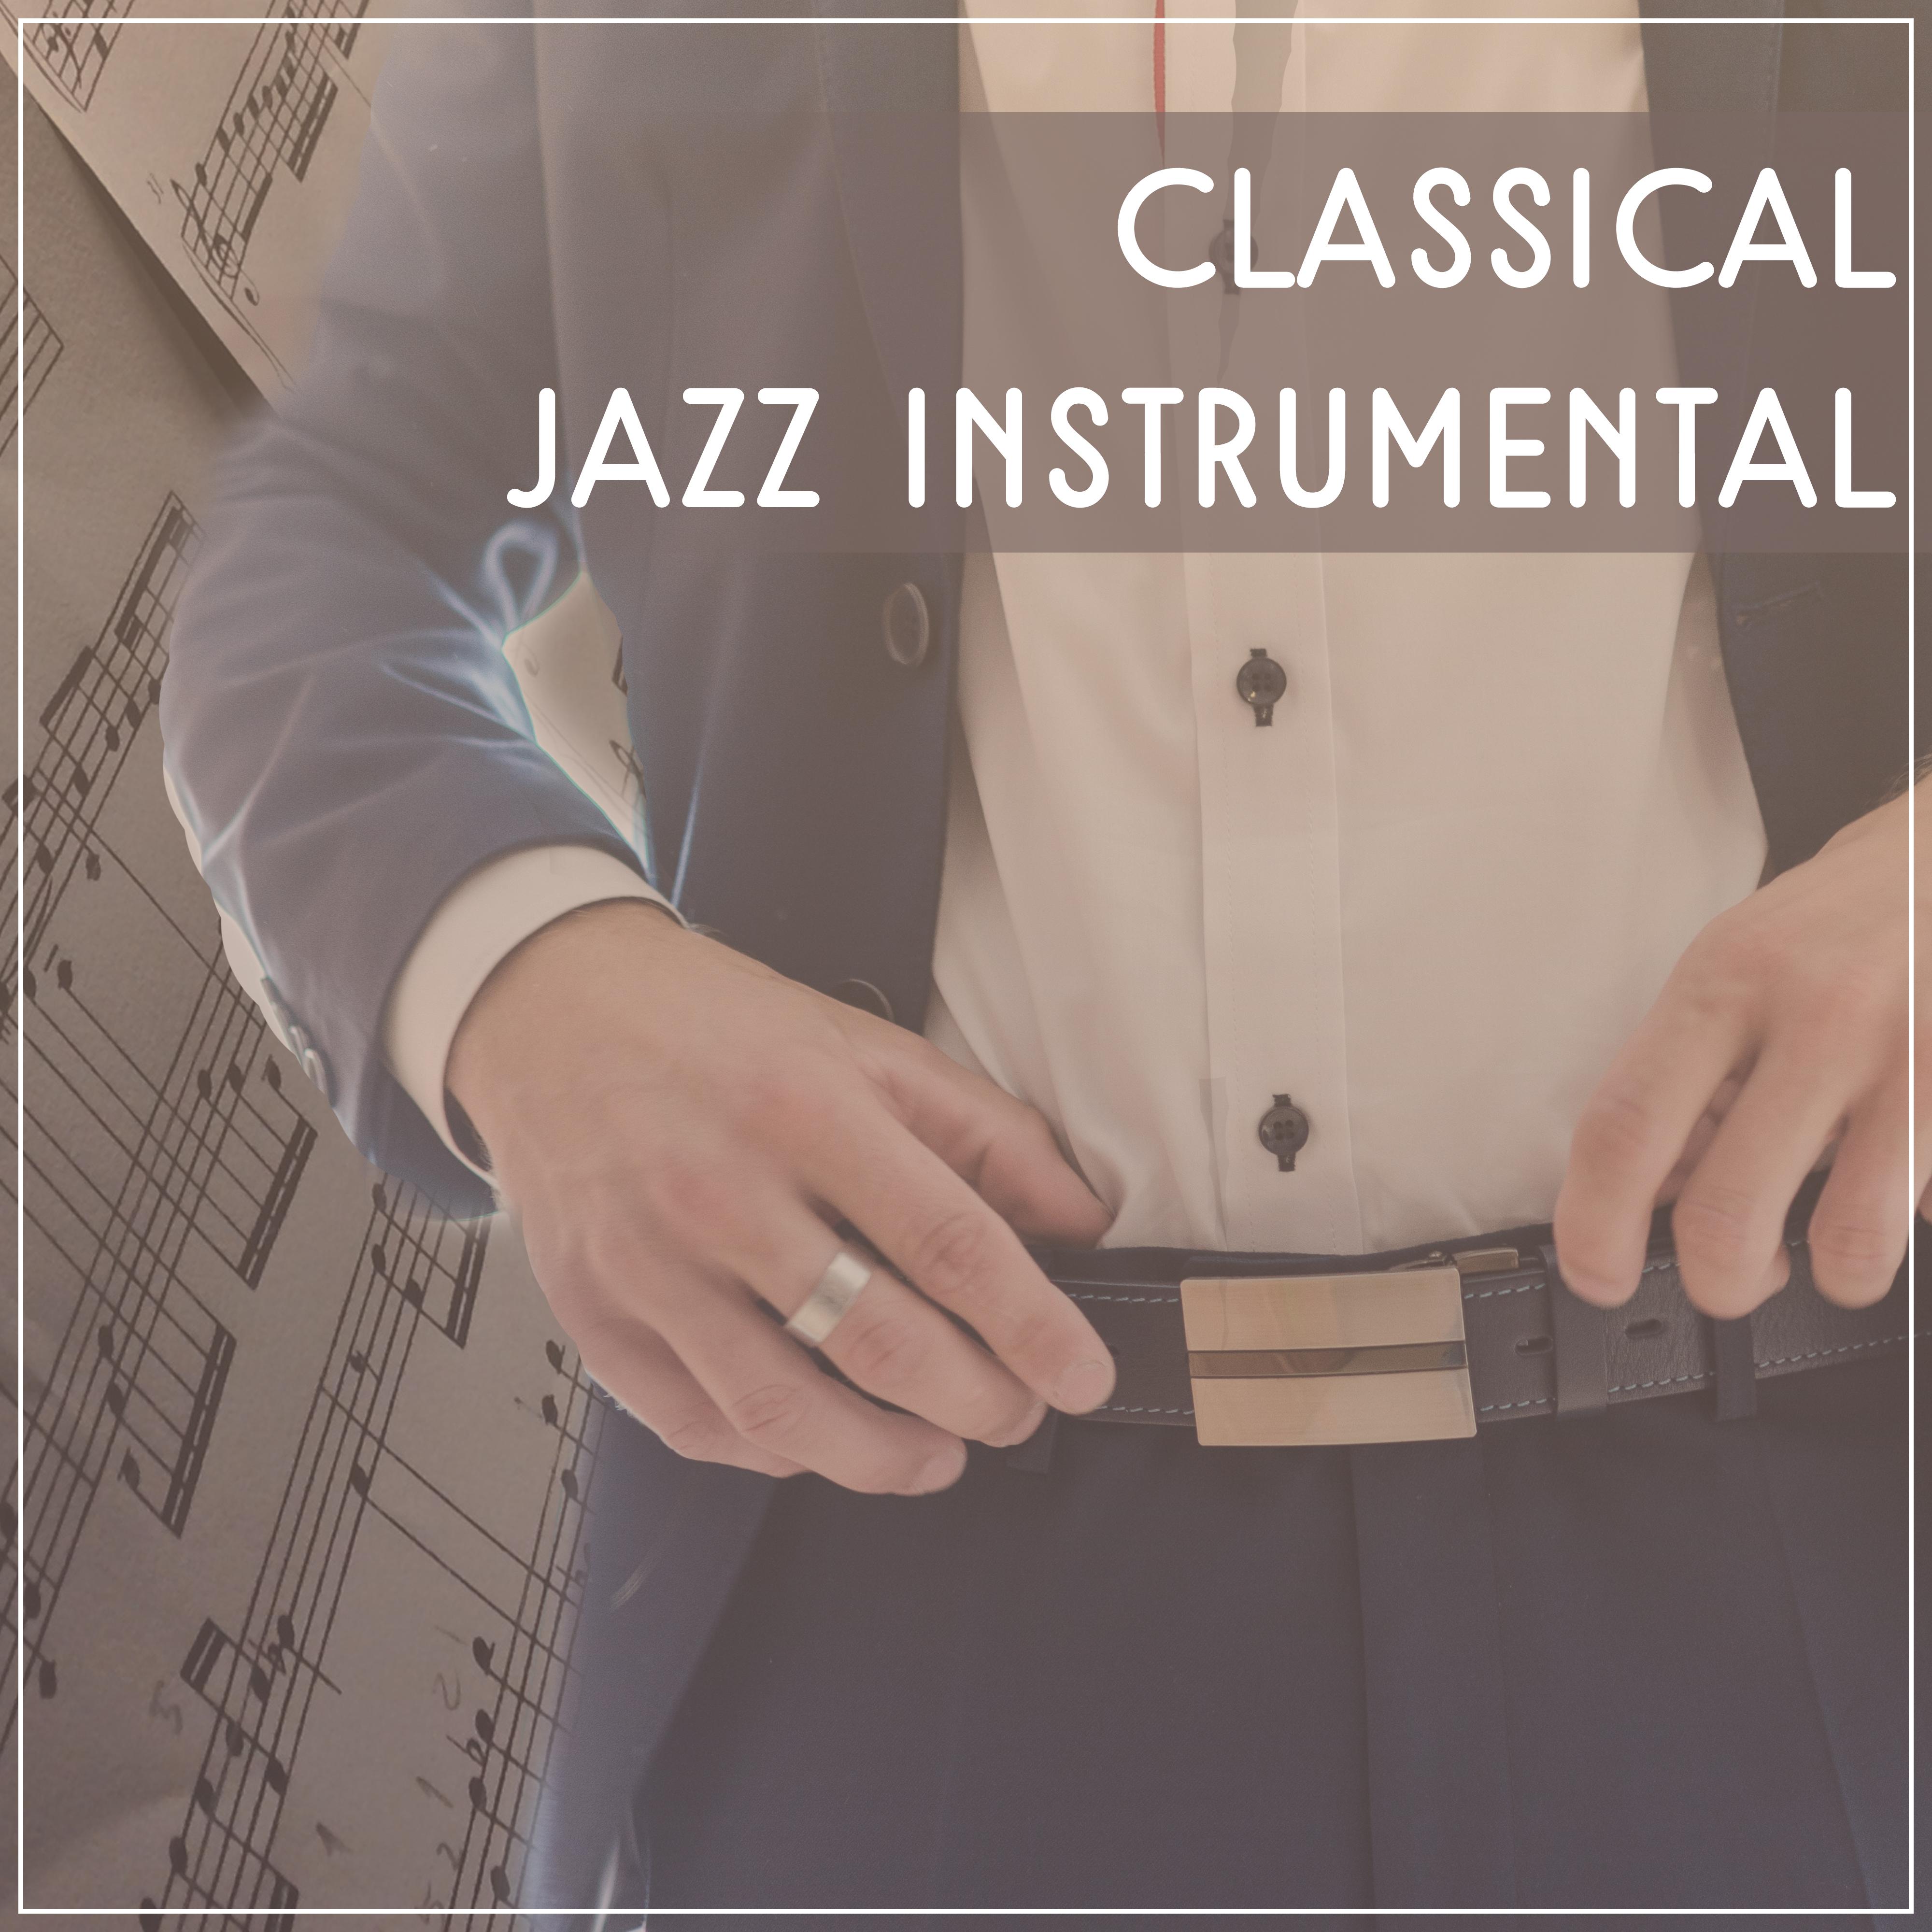 Classical Jazz Instrumental  Ambient Smooth Jazz, Piano Bar, Jazz Lounge, Relaxed Piano